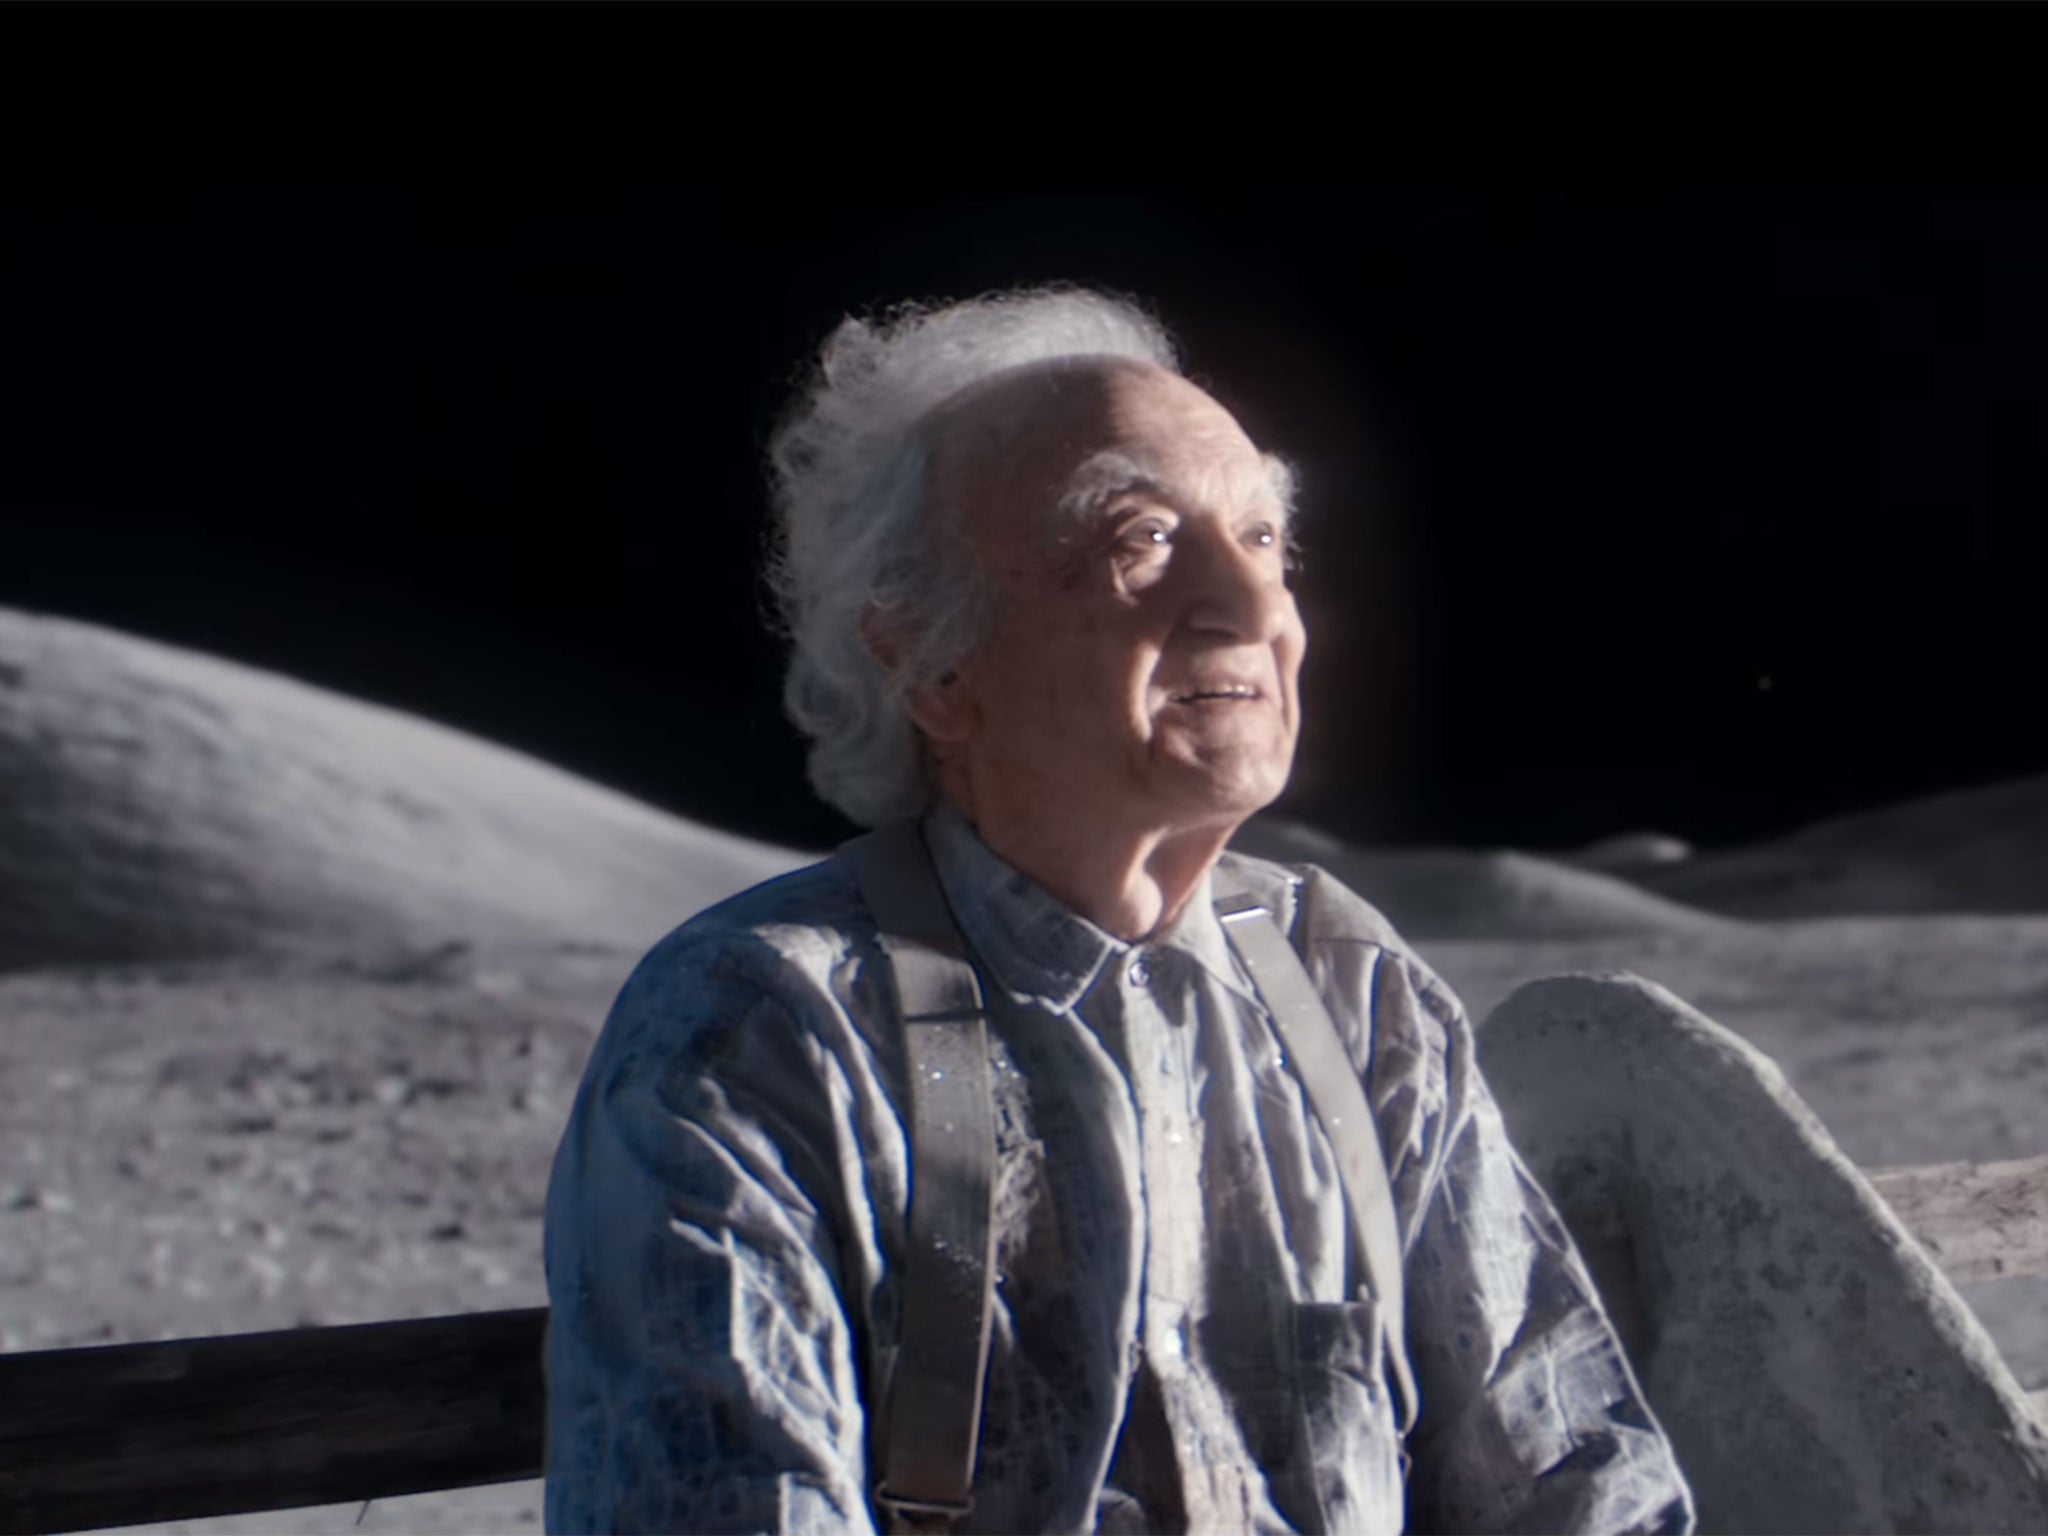 A 5.1% rise in sales for John Lewis over the Christmas period has been attributed to the success of their 'Man on the Moon' television advert